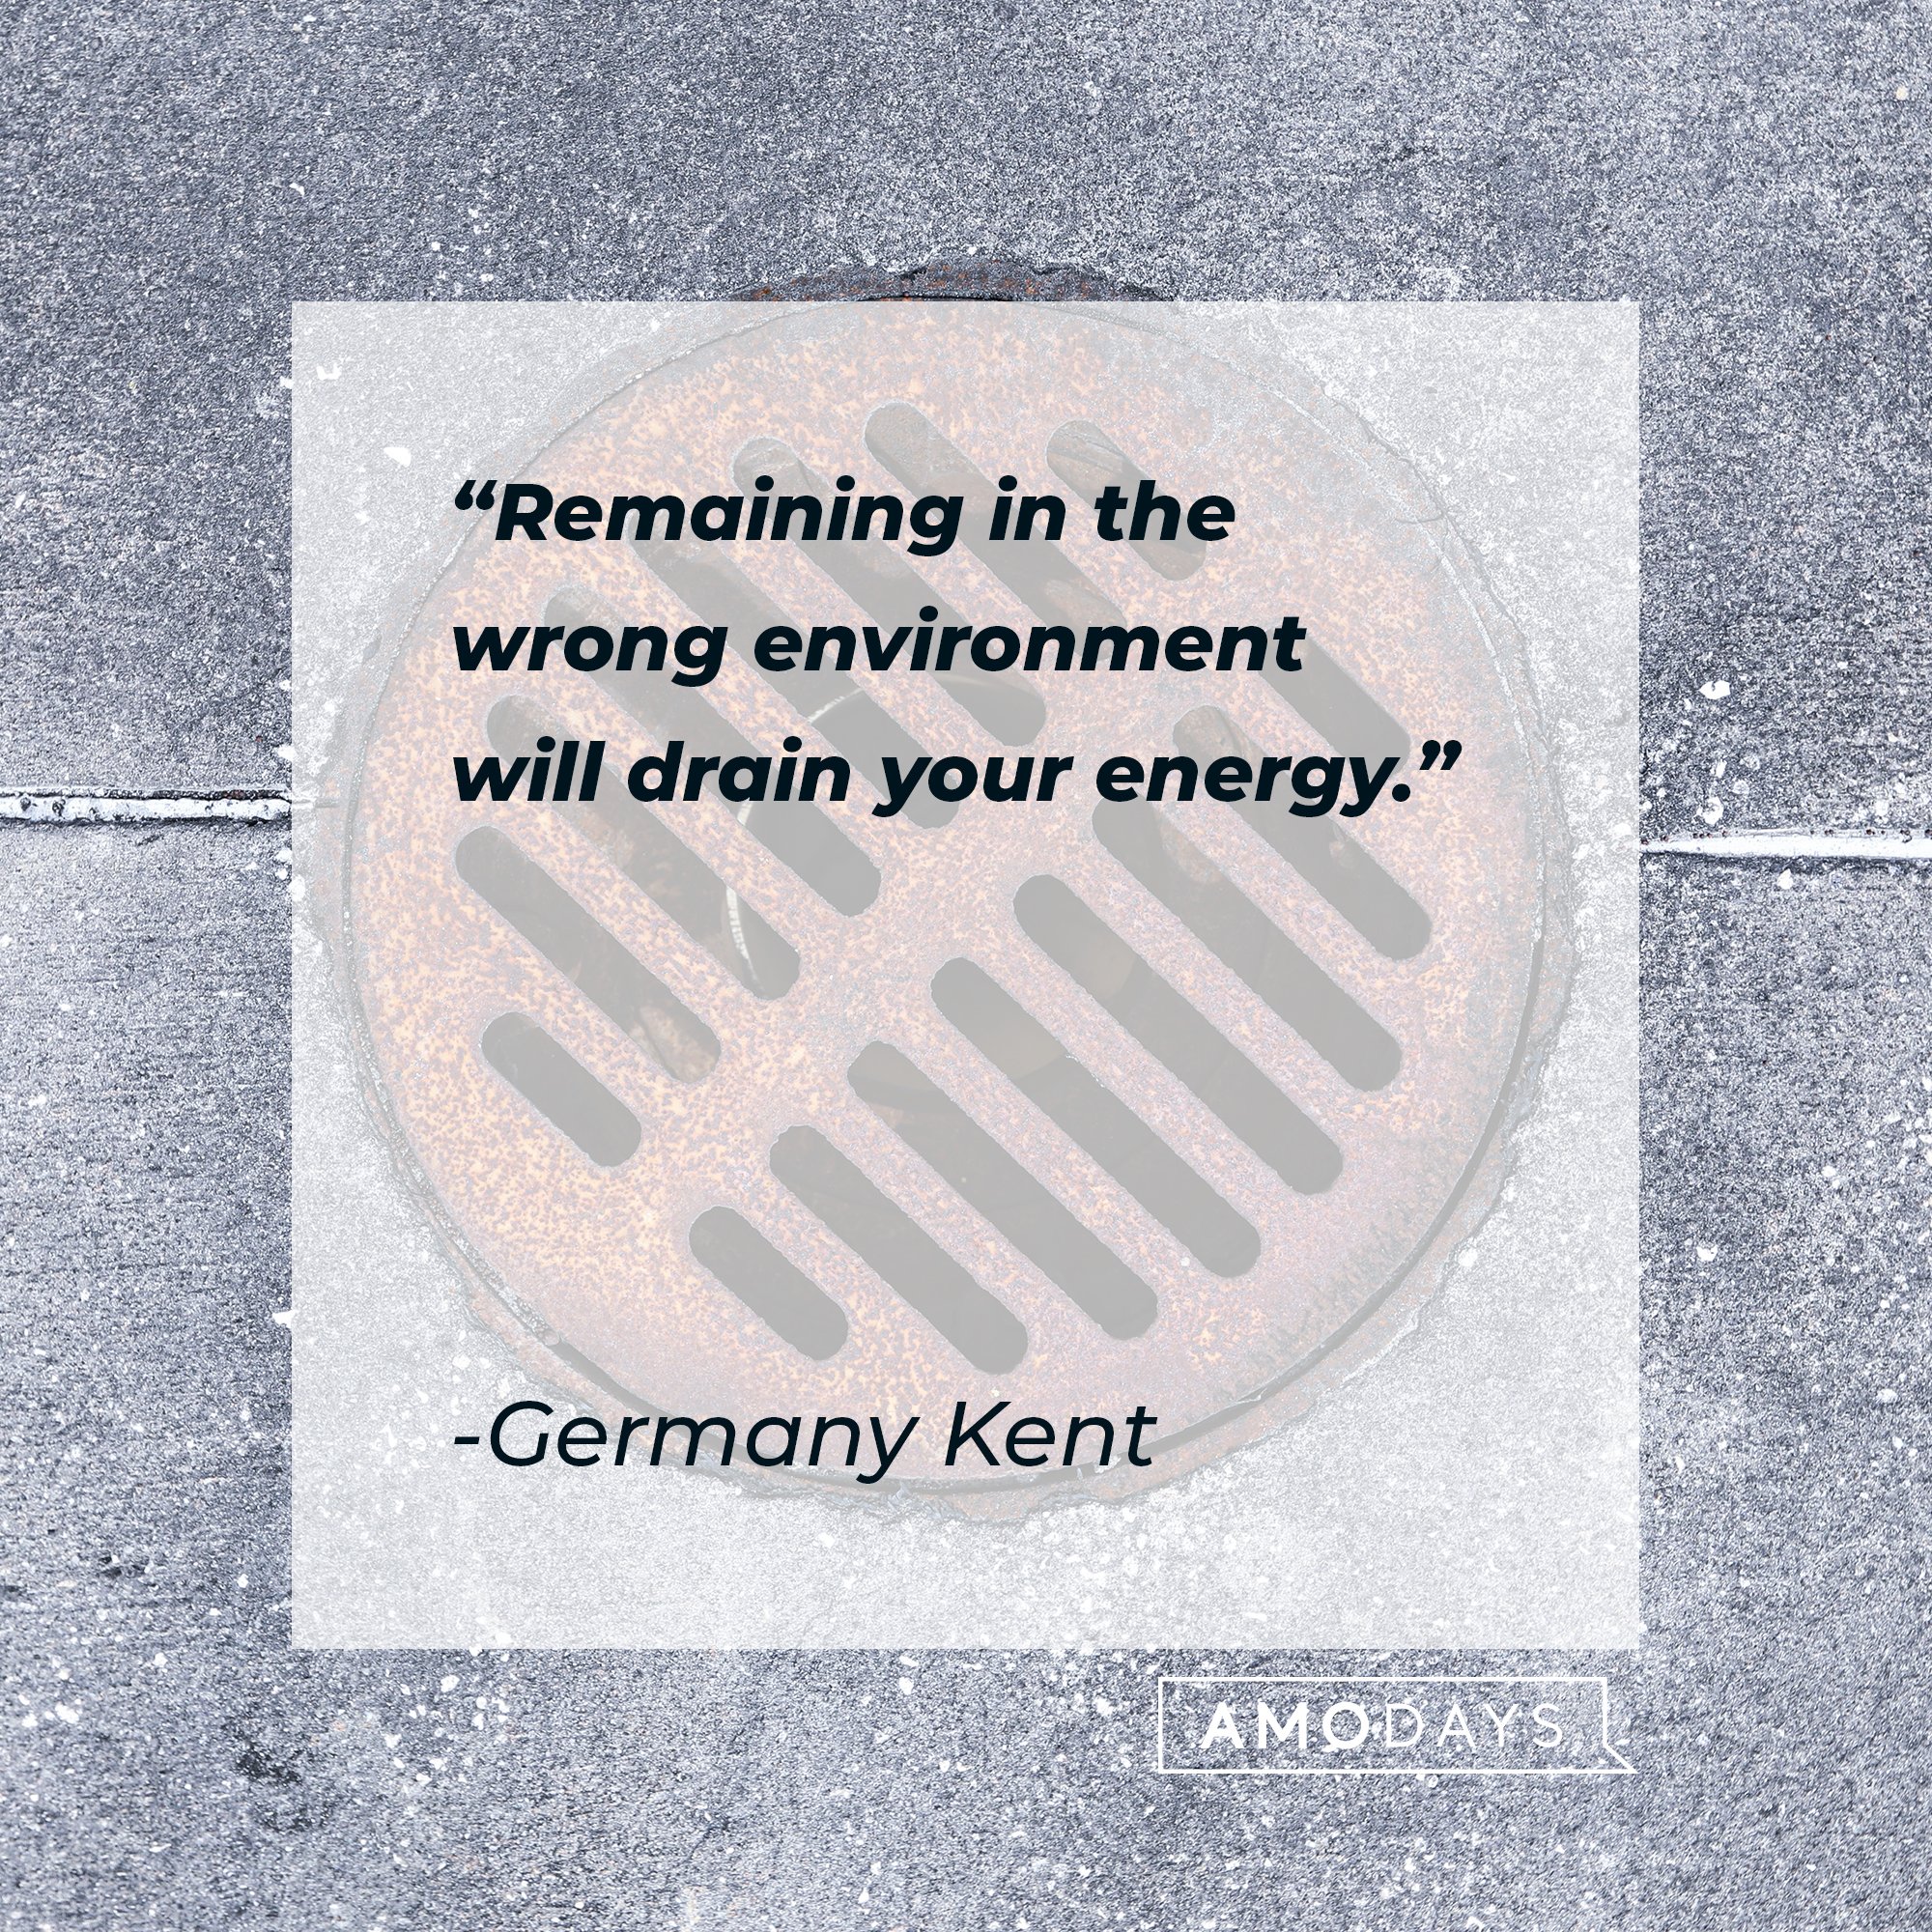 Germany Kent’s quote: "Remaining in the wrong environment will drain your energy." | Image: AmoDays